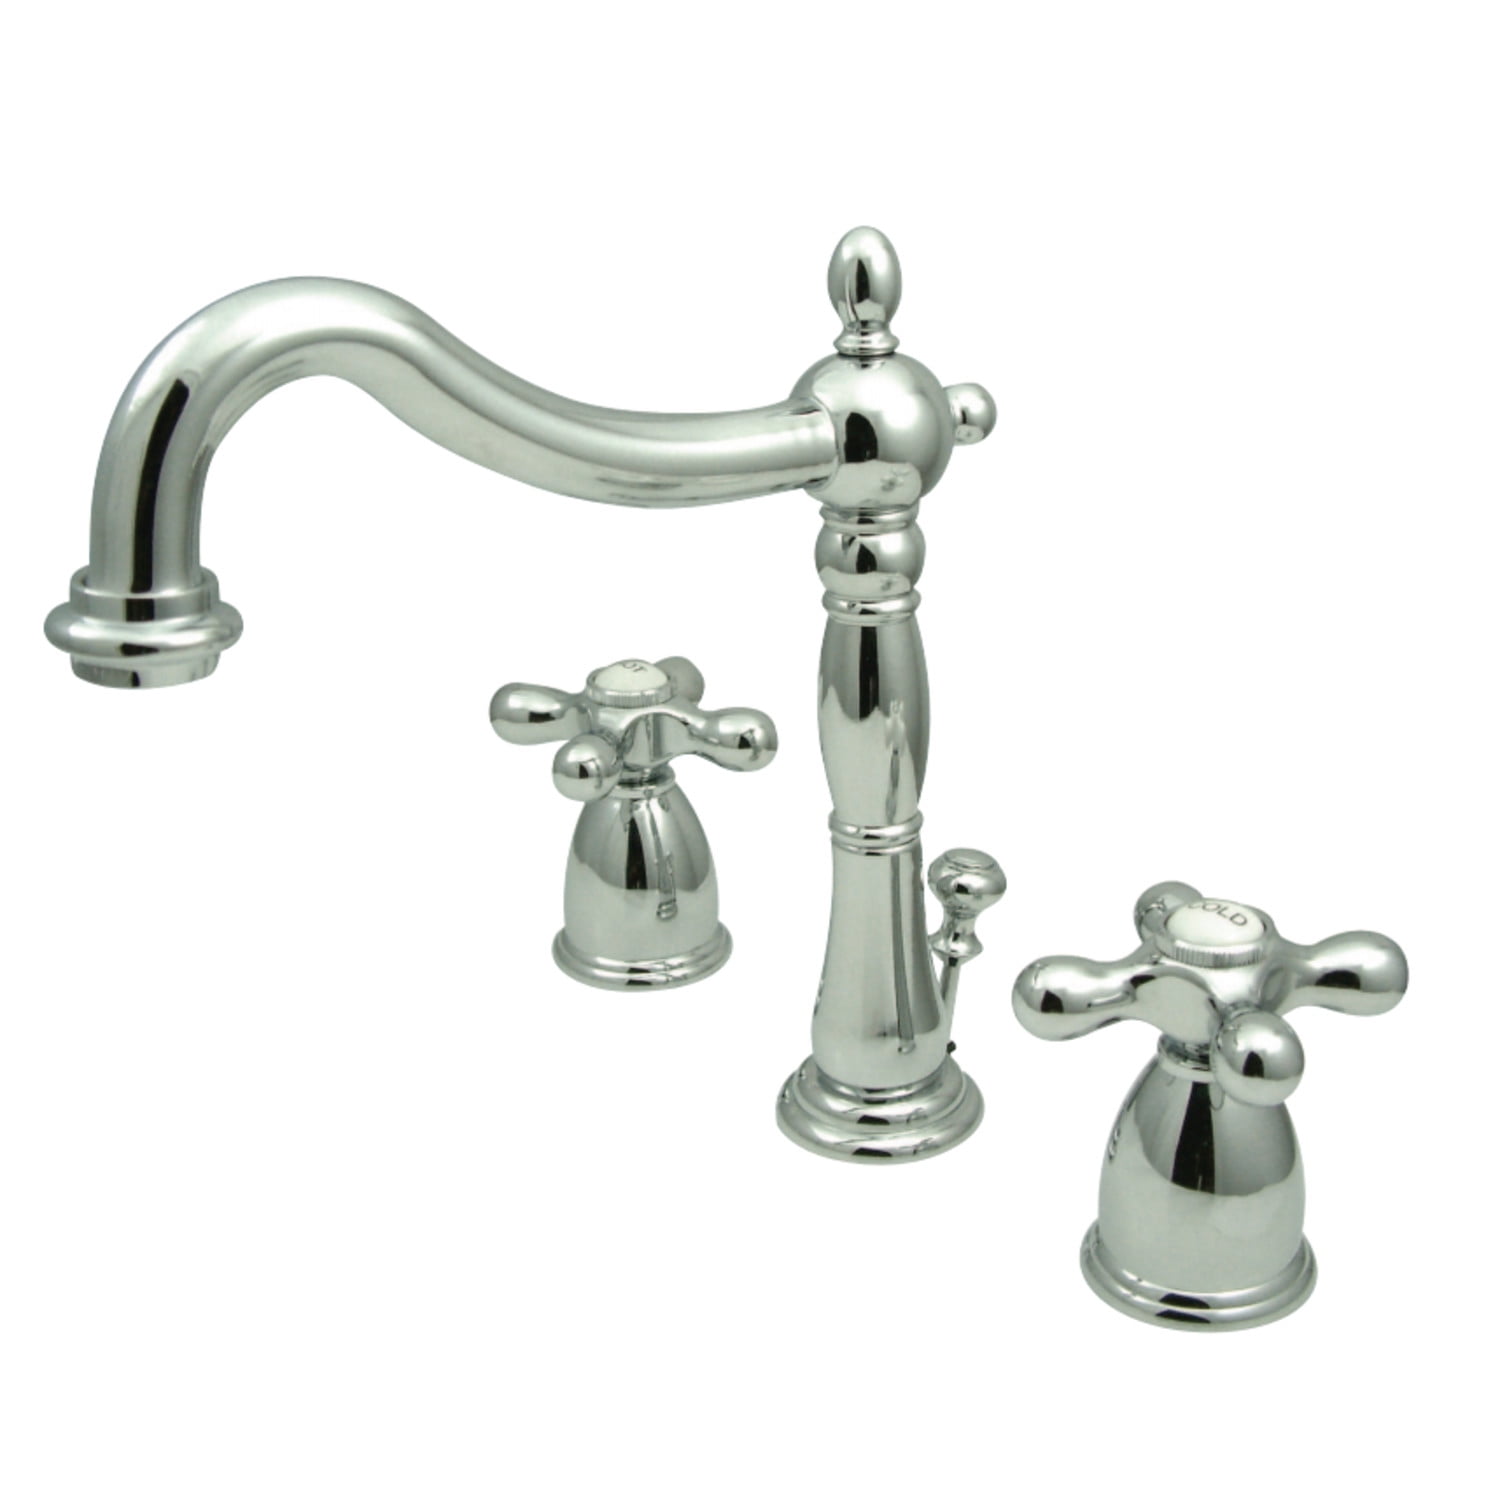 Kingston Brass KB1971AX Heritage Widespread Bathroom Faucet with Plastic Pop-Up, Polished Chrome